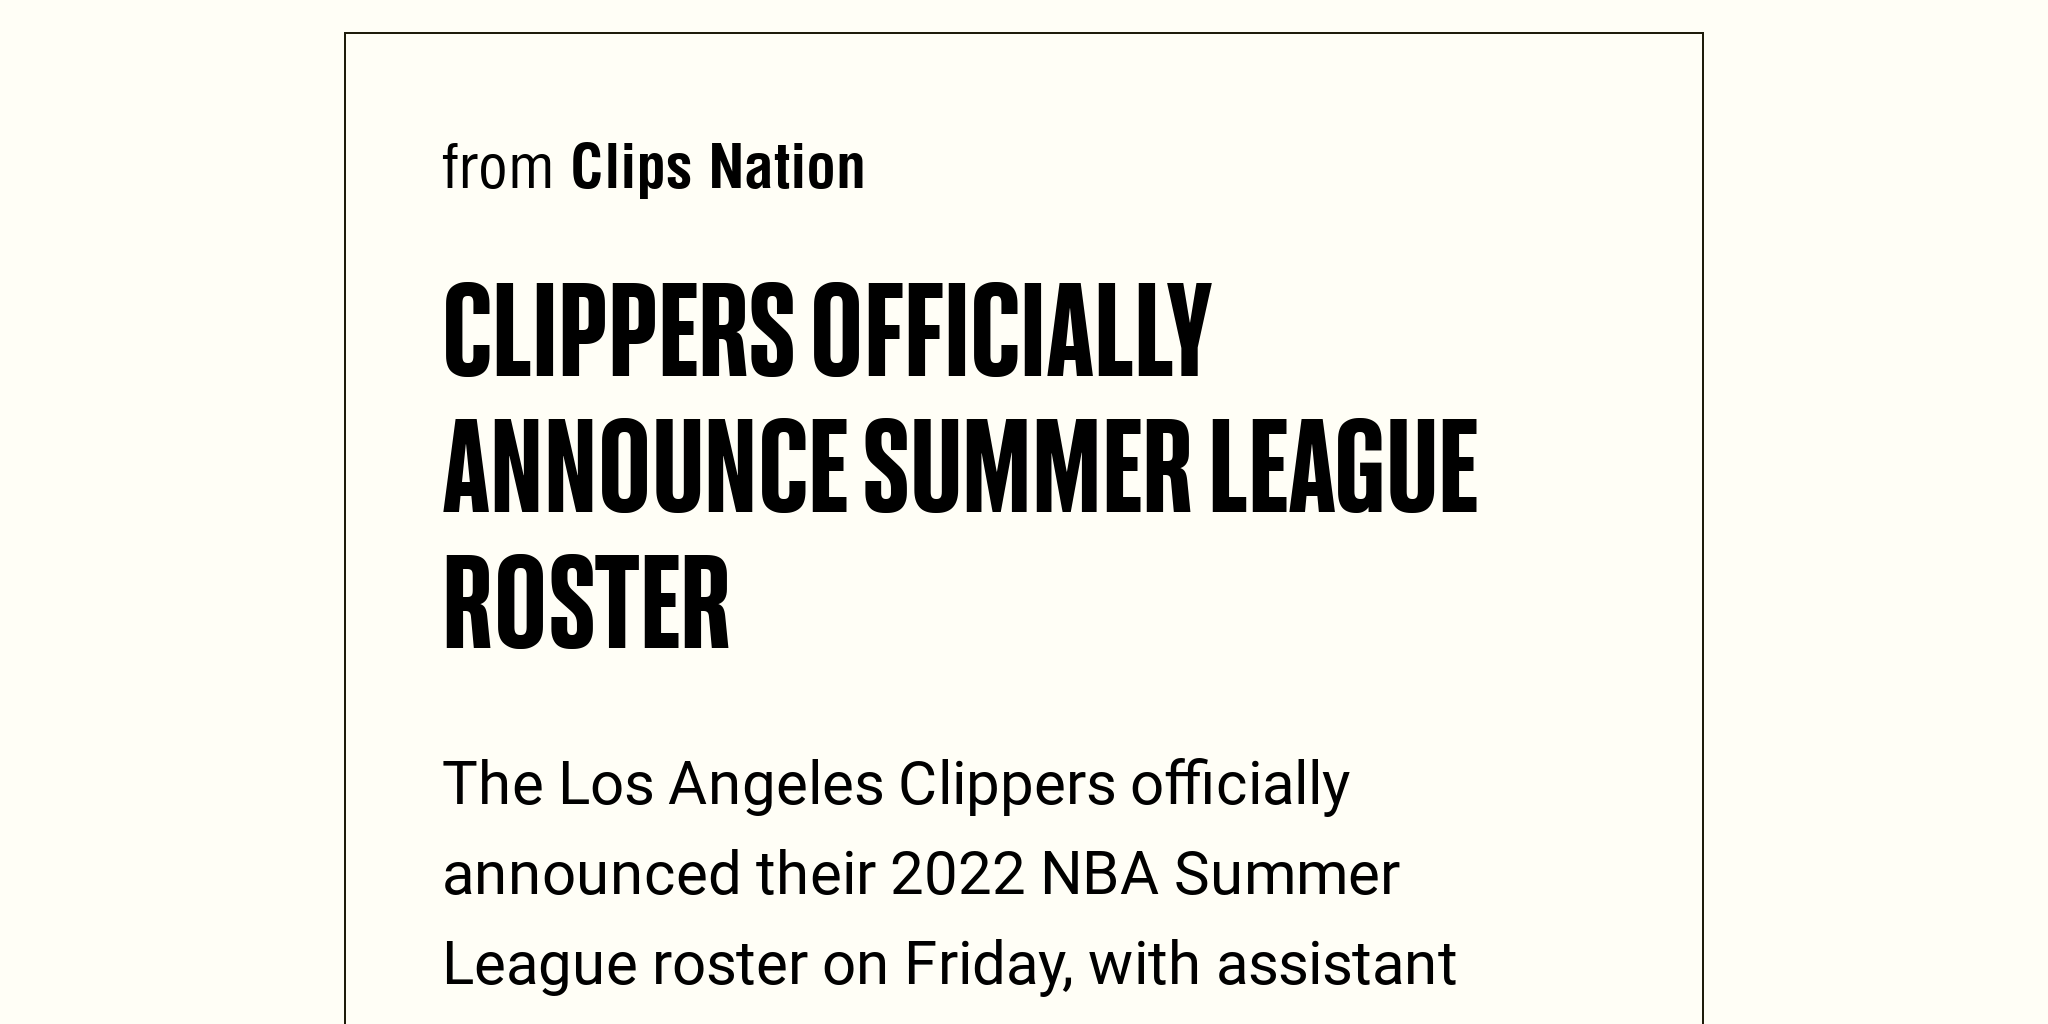 Clippers officially announce Summer League roster Briefly